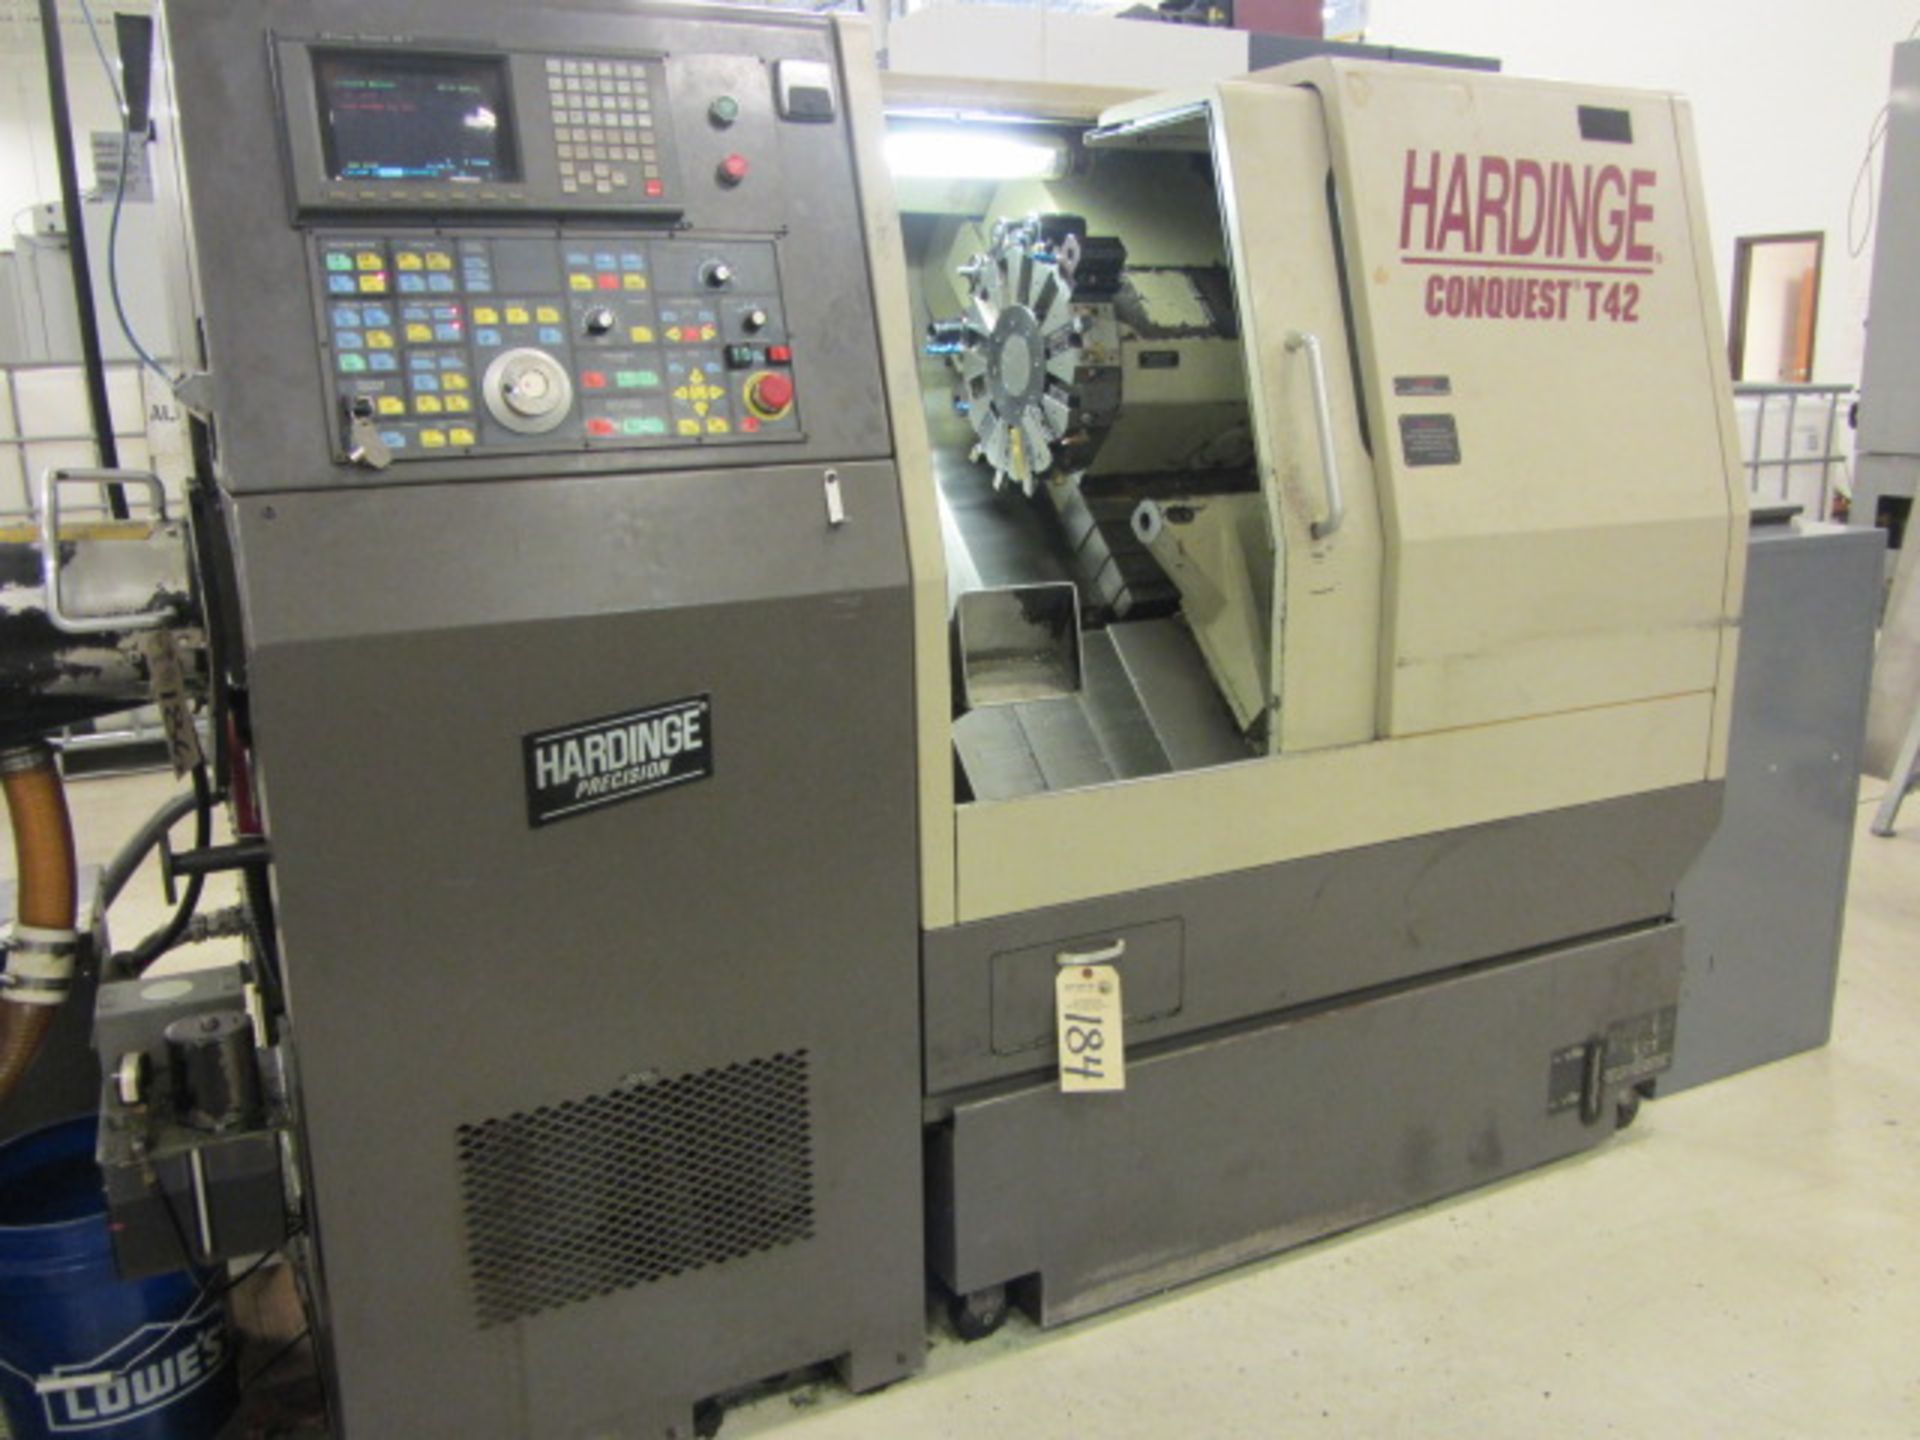 Hardinge Conquest T42 CNC Turning Center with 6'' Chuck, Collet Spindle Nose, Spindle Speeds to 5000 - Image 8 of 9